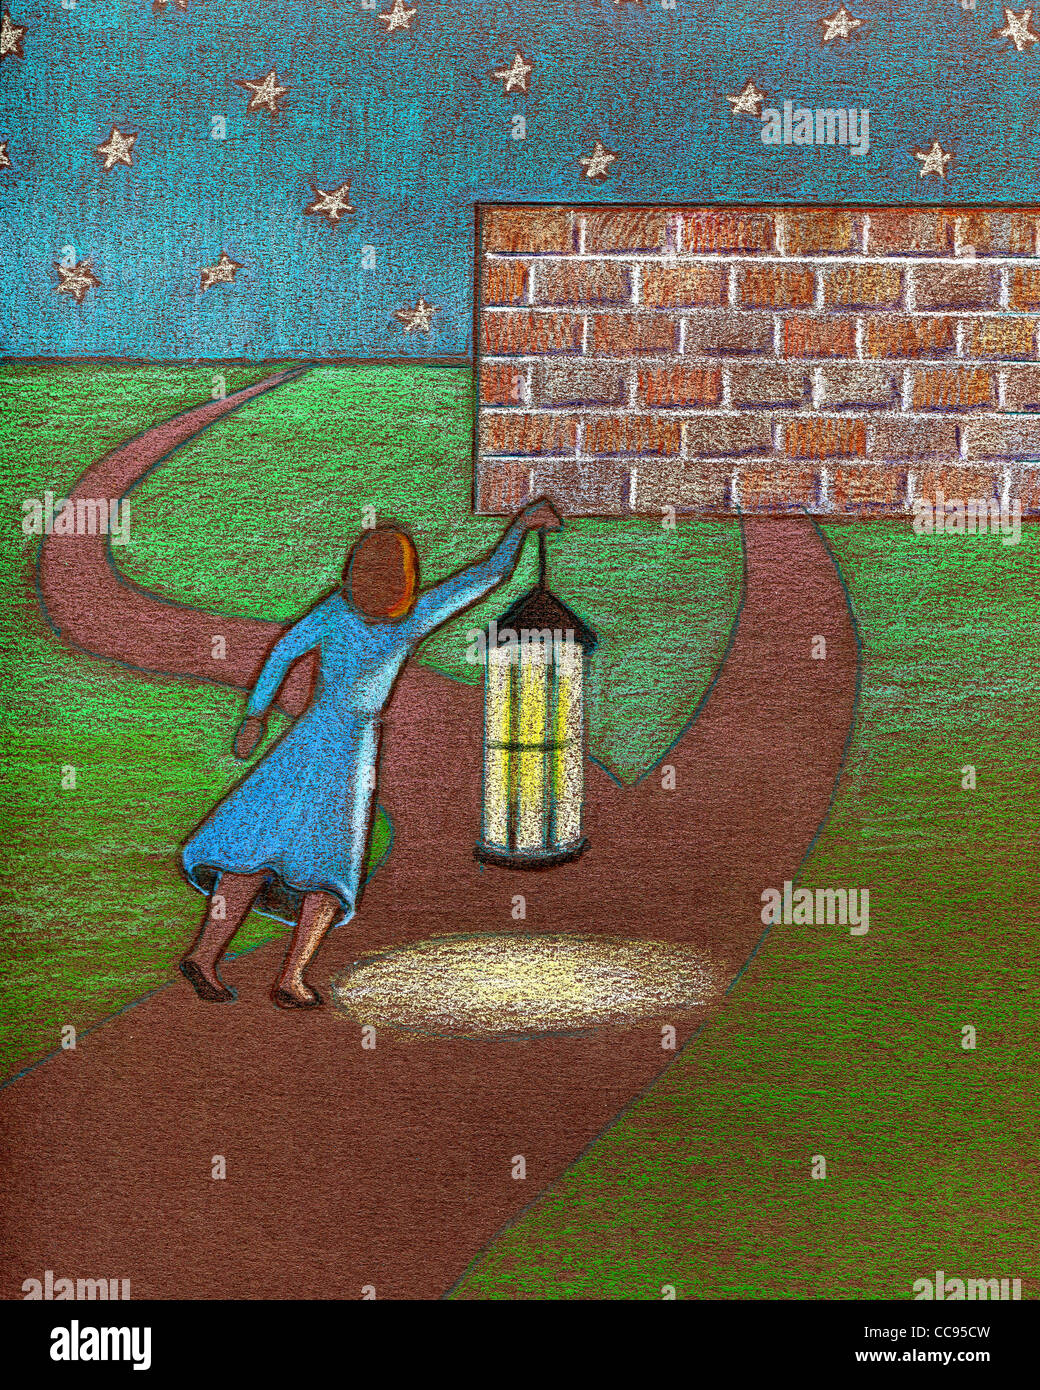 A businesswoman using a lantern to light her way along a path Stock Photo